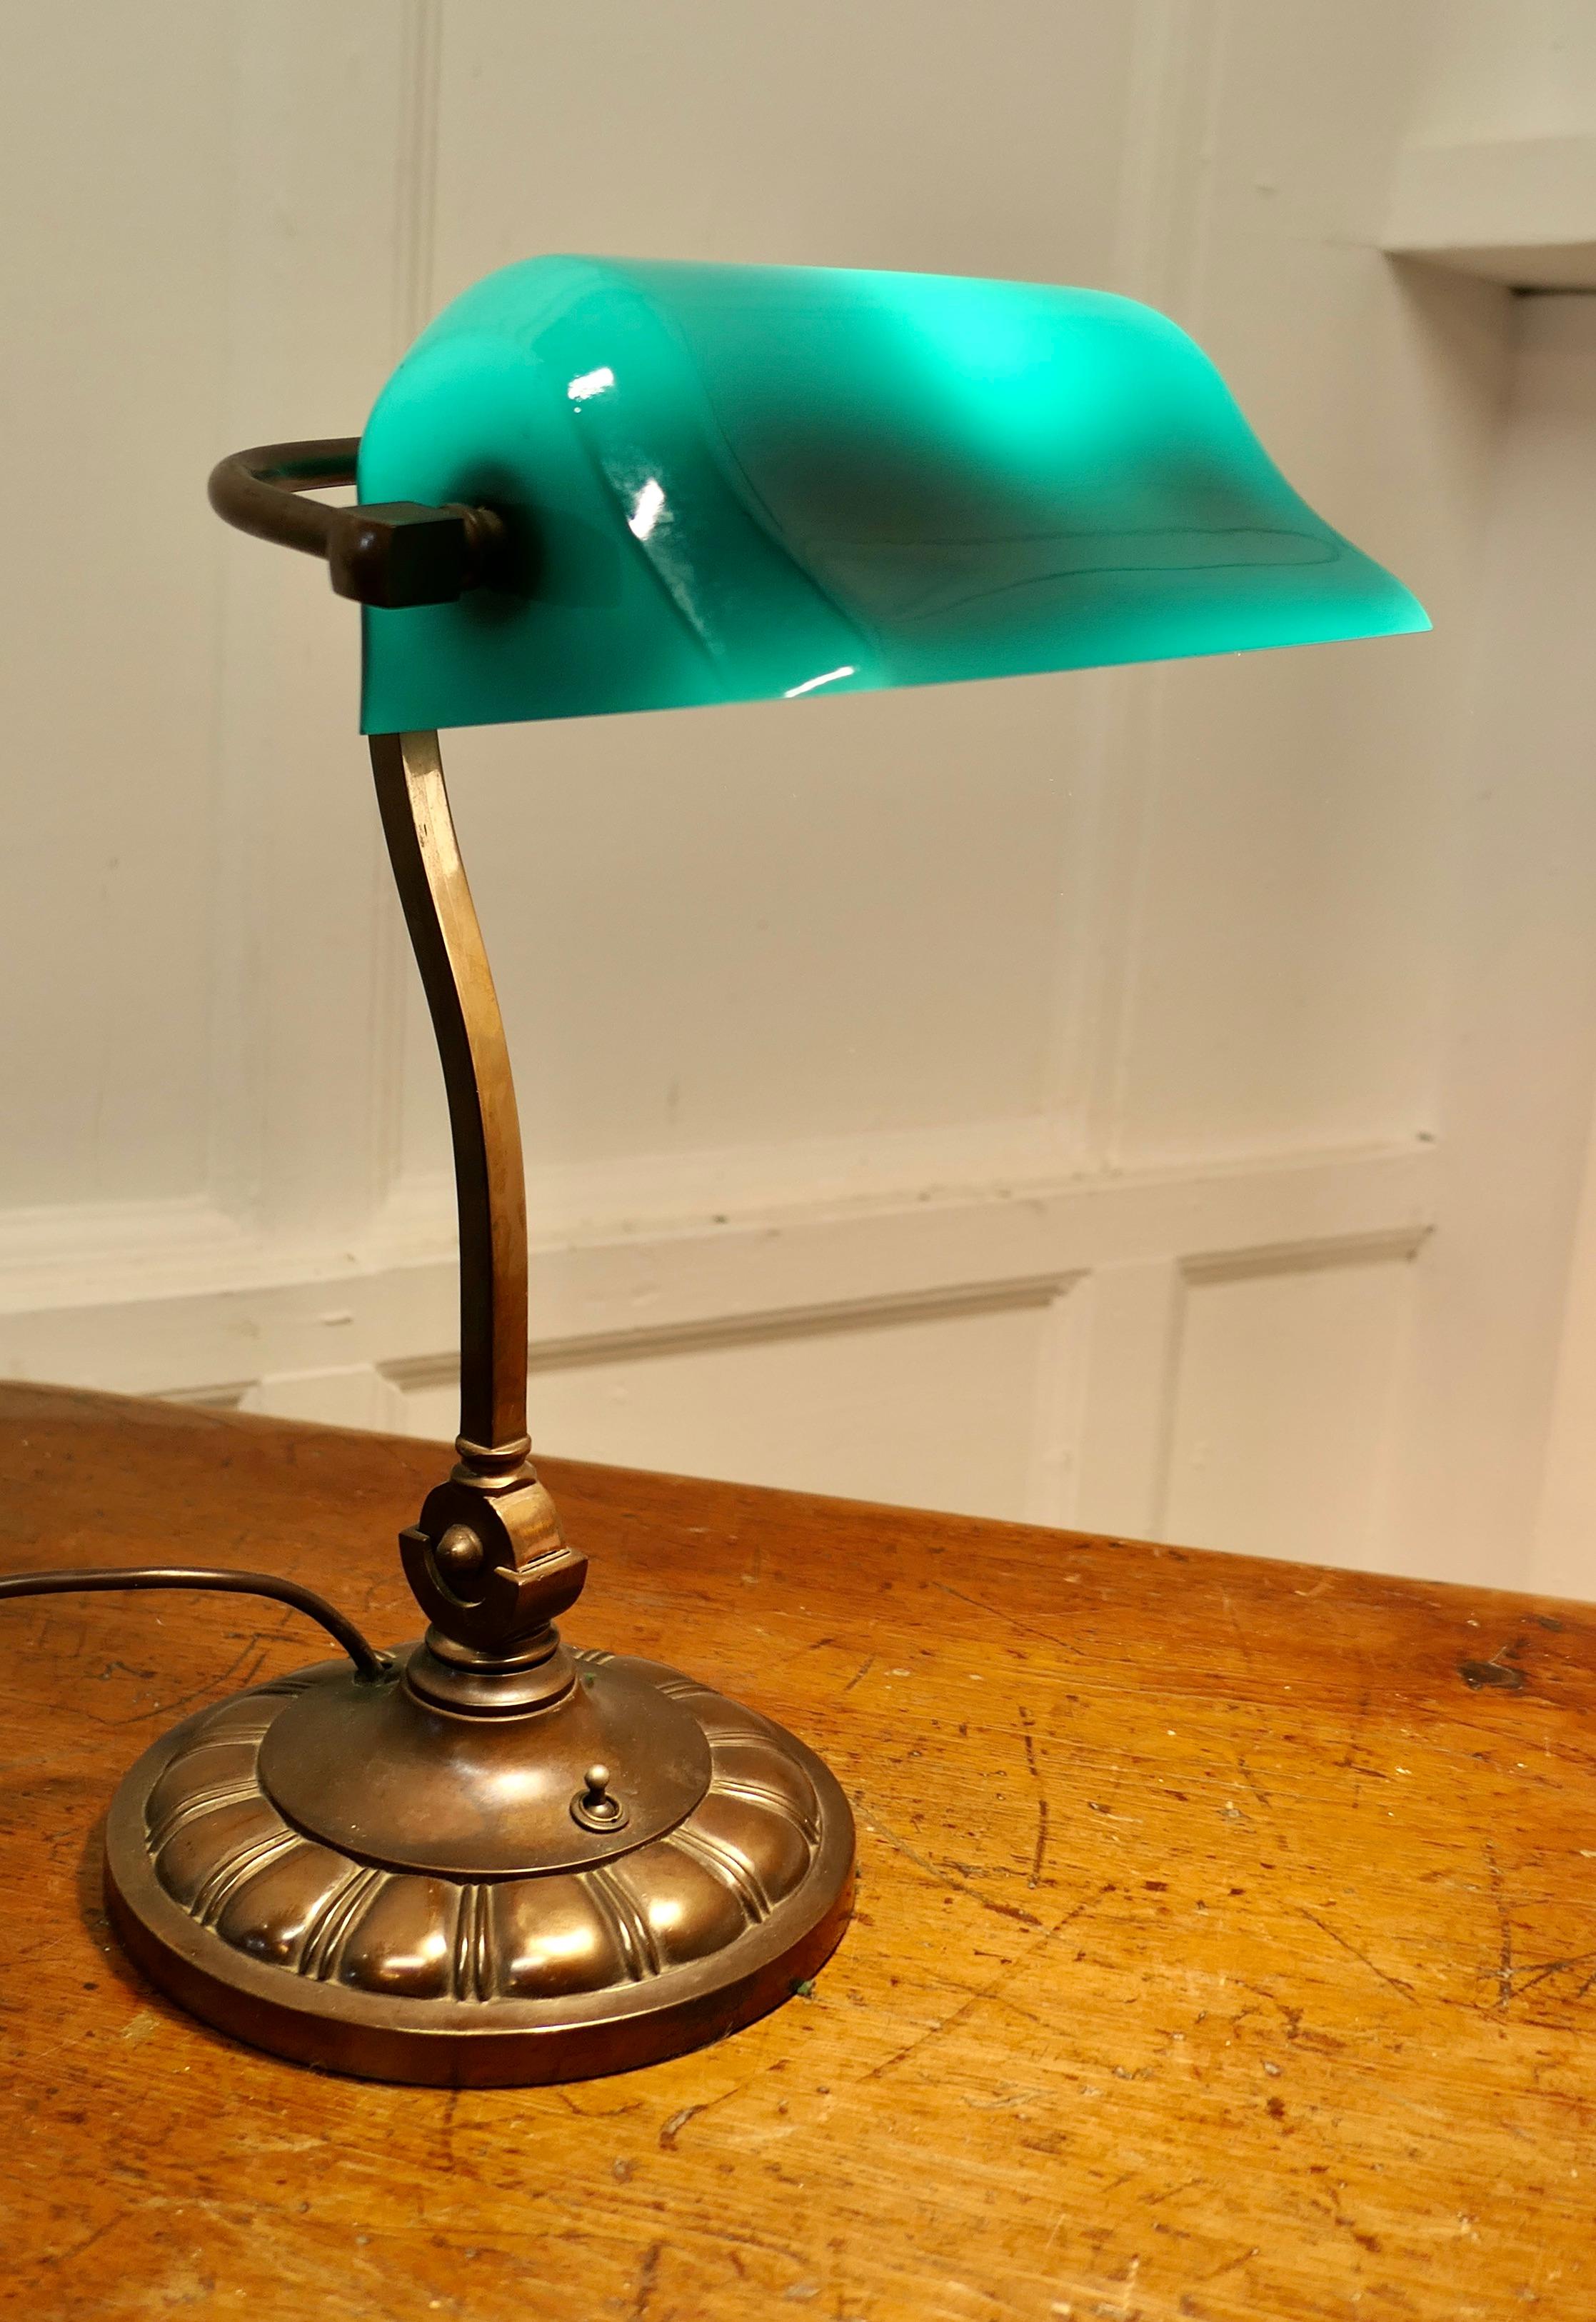 Early 20th Century Copper and Green Glass Barrister’s Desk Lamp

A beautiful and seldom seen heavy quality fully adjustable early vintage barrister’s brass desk lamp, with its original green glass lampshade which has a white reflective underside
The